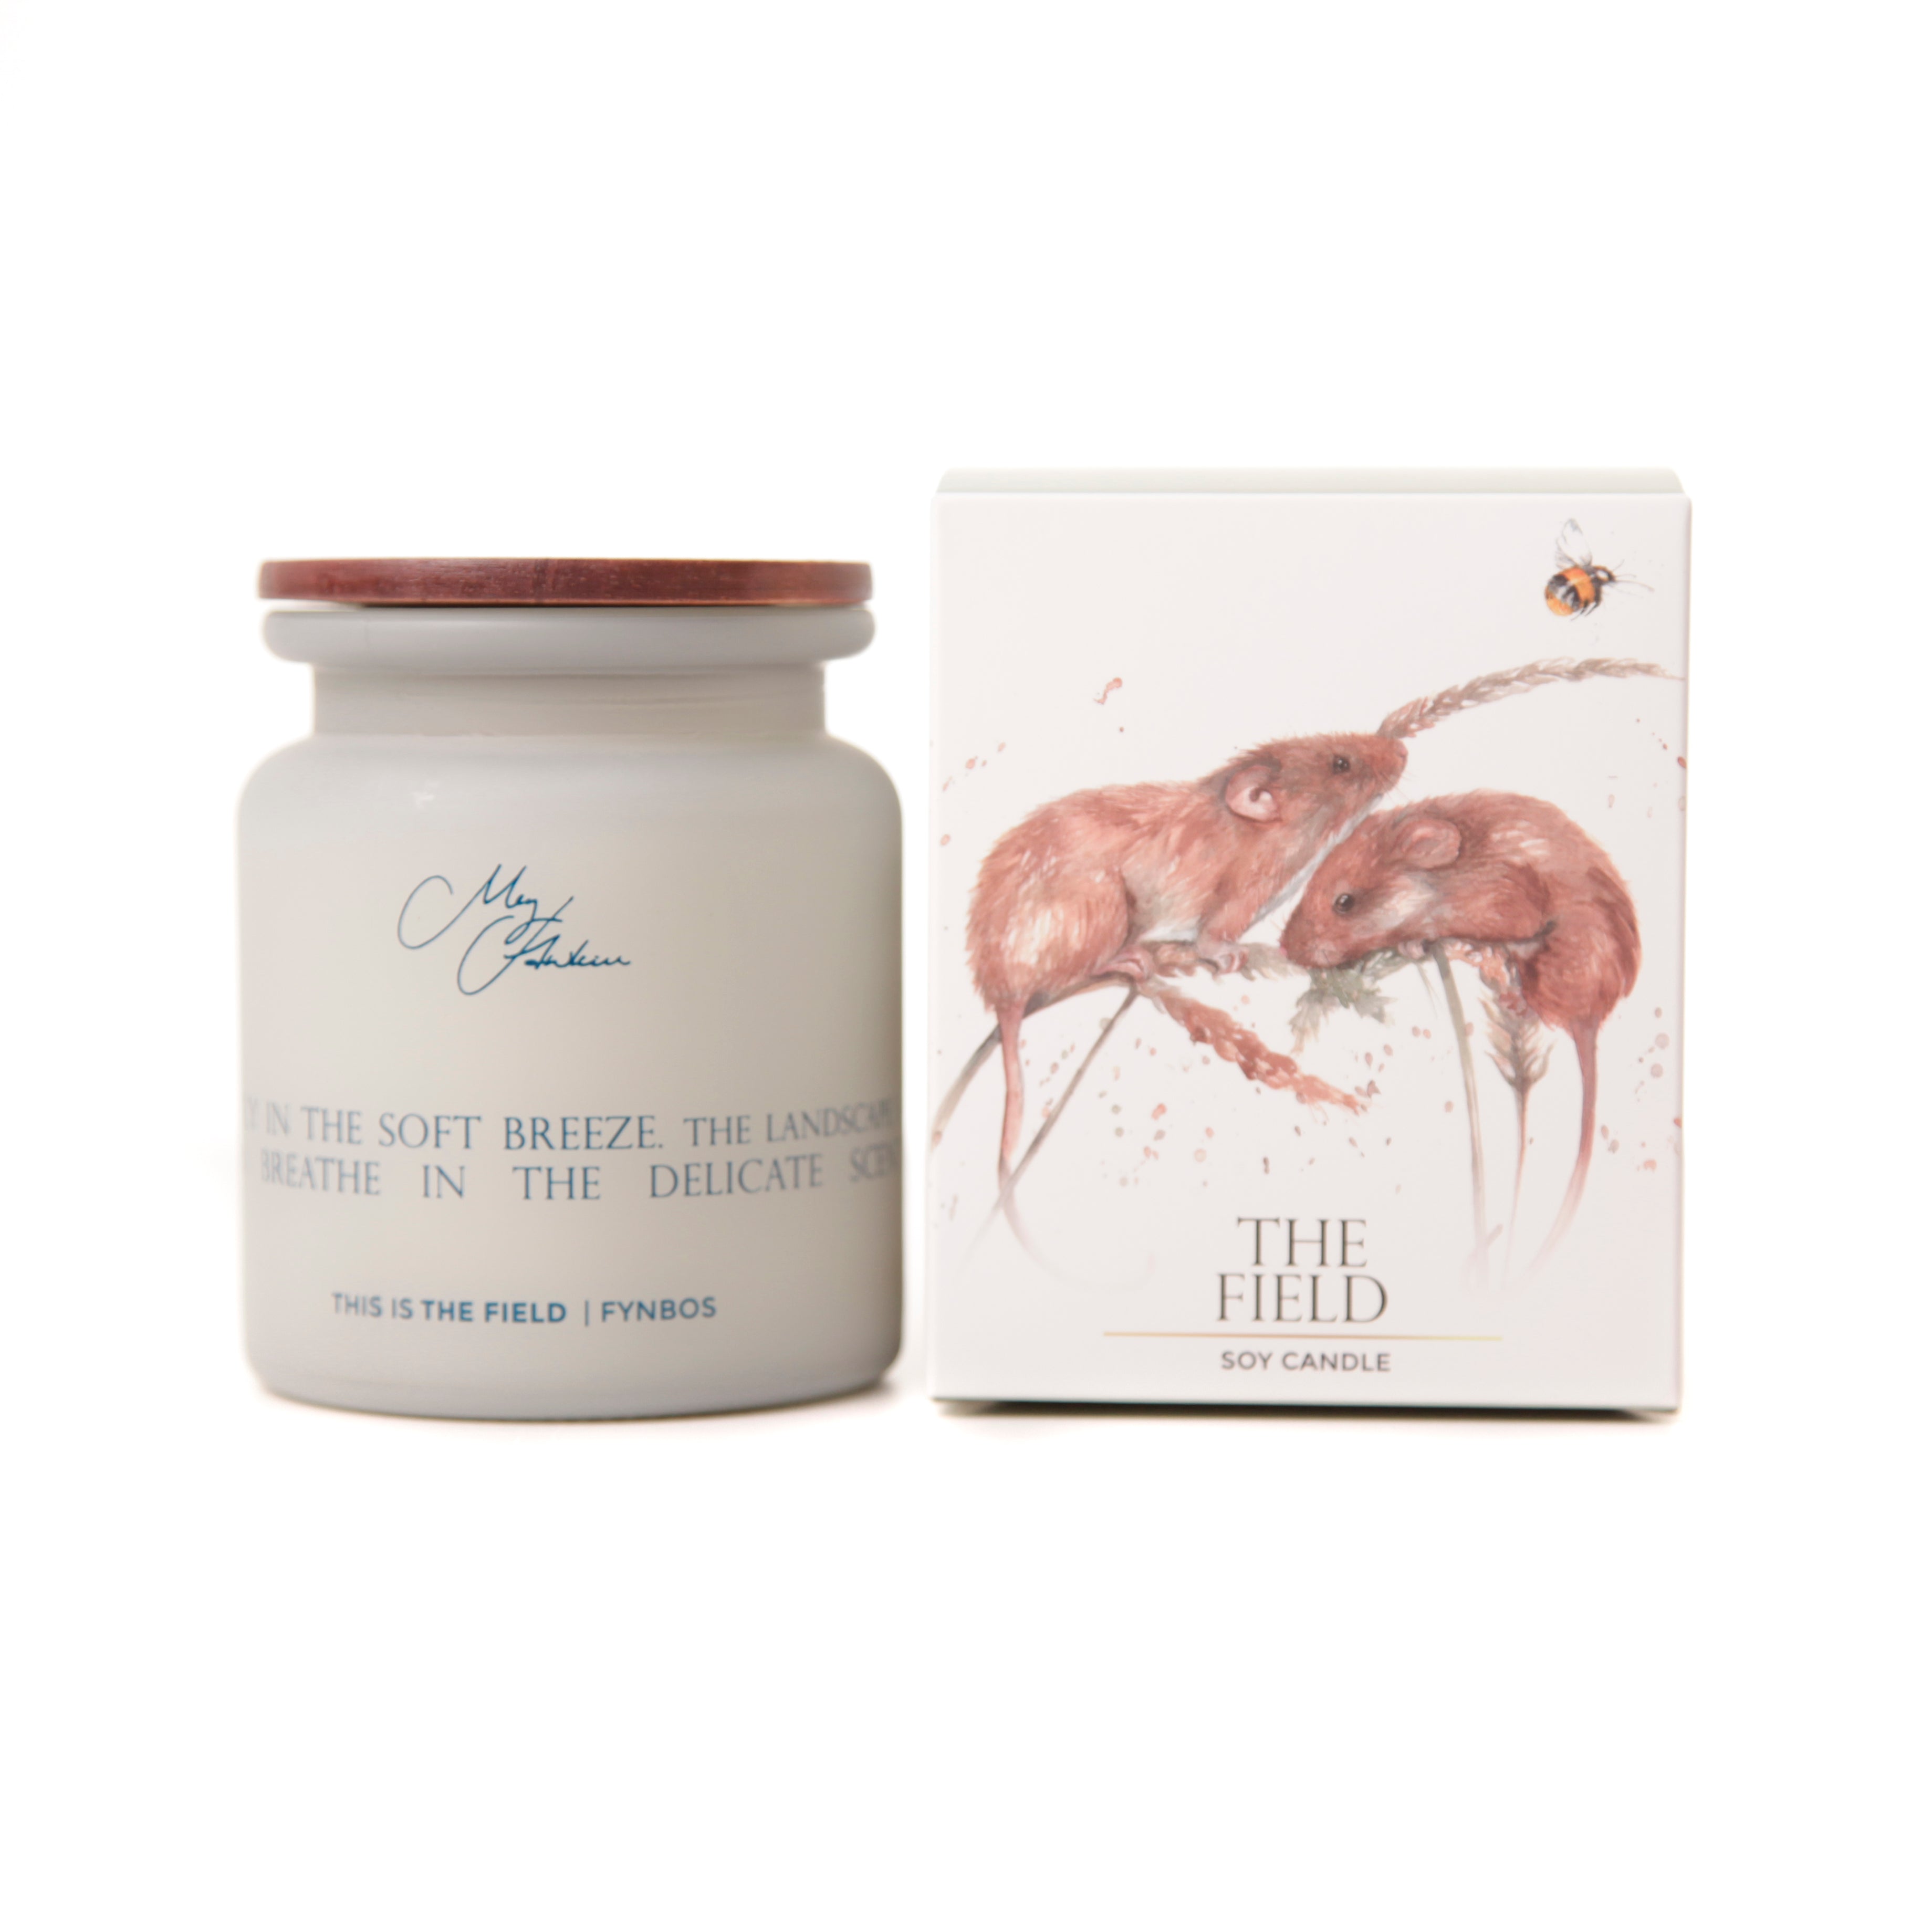 The Field - Field Mice Design Candle